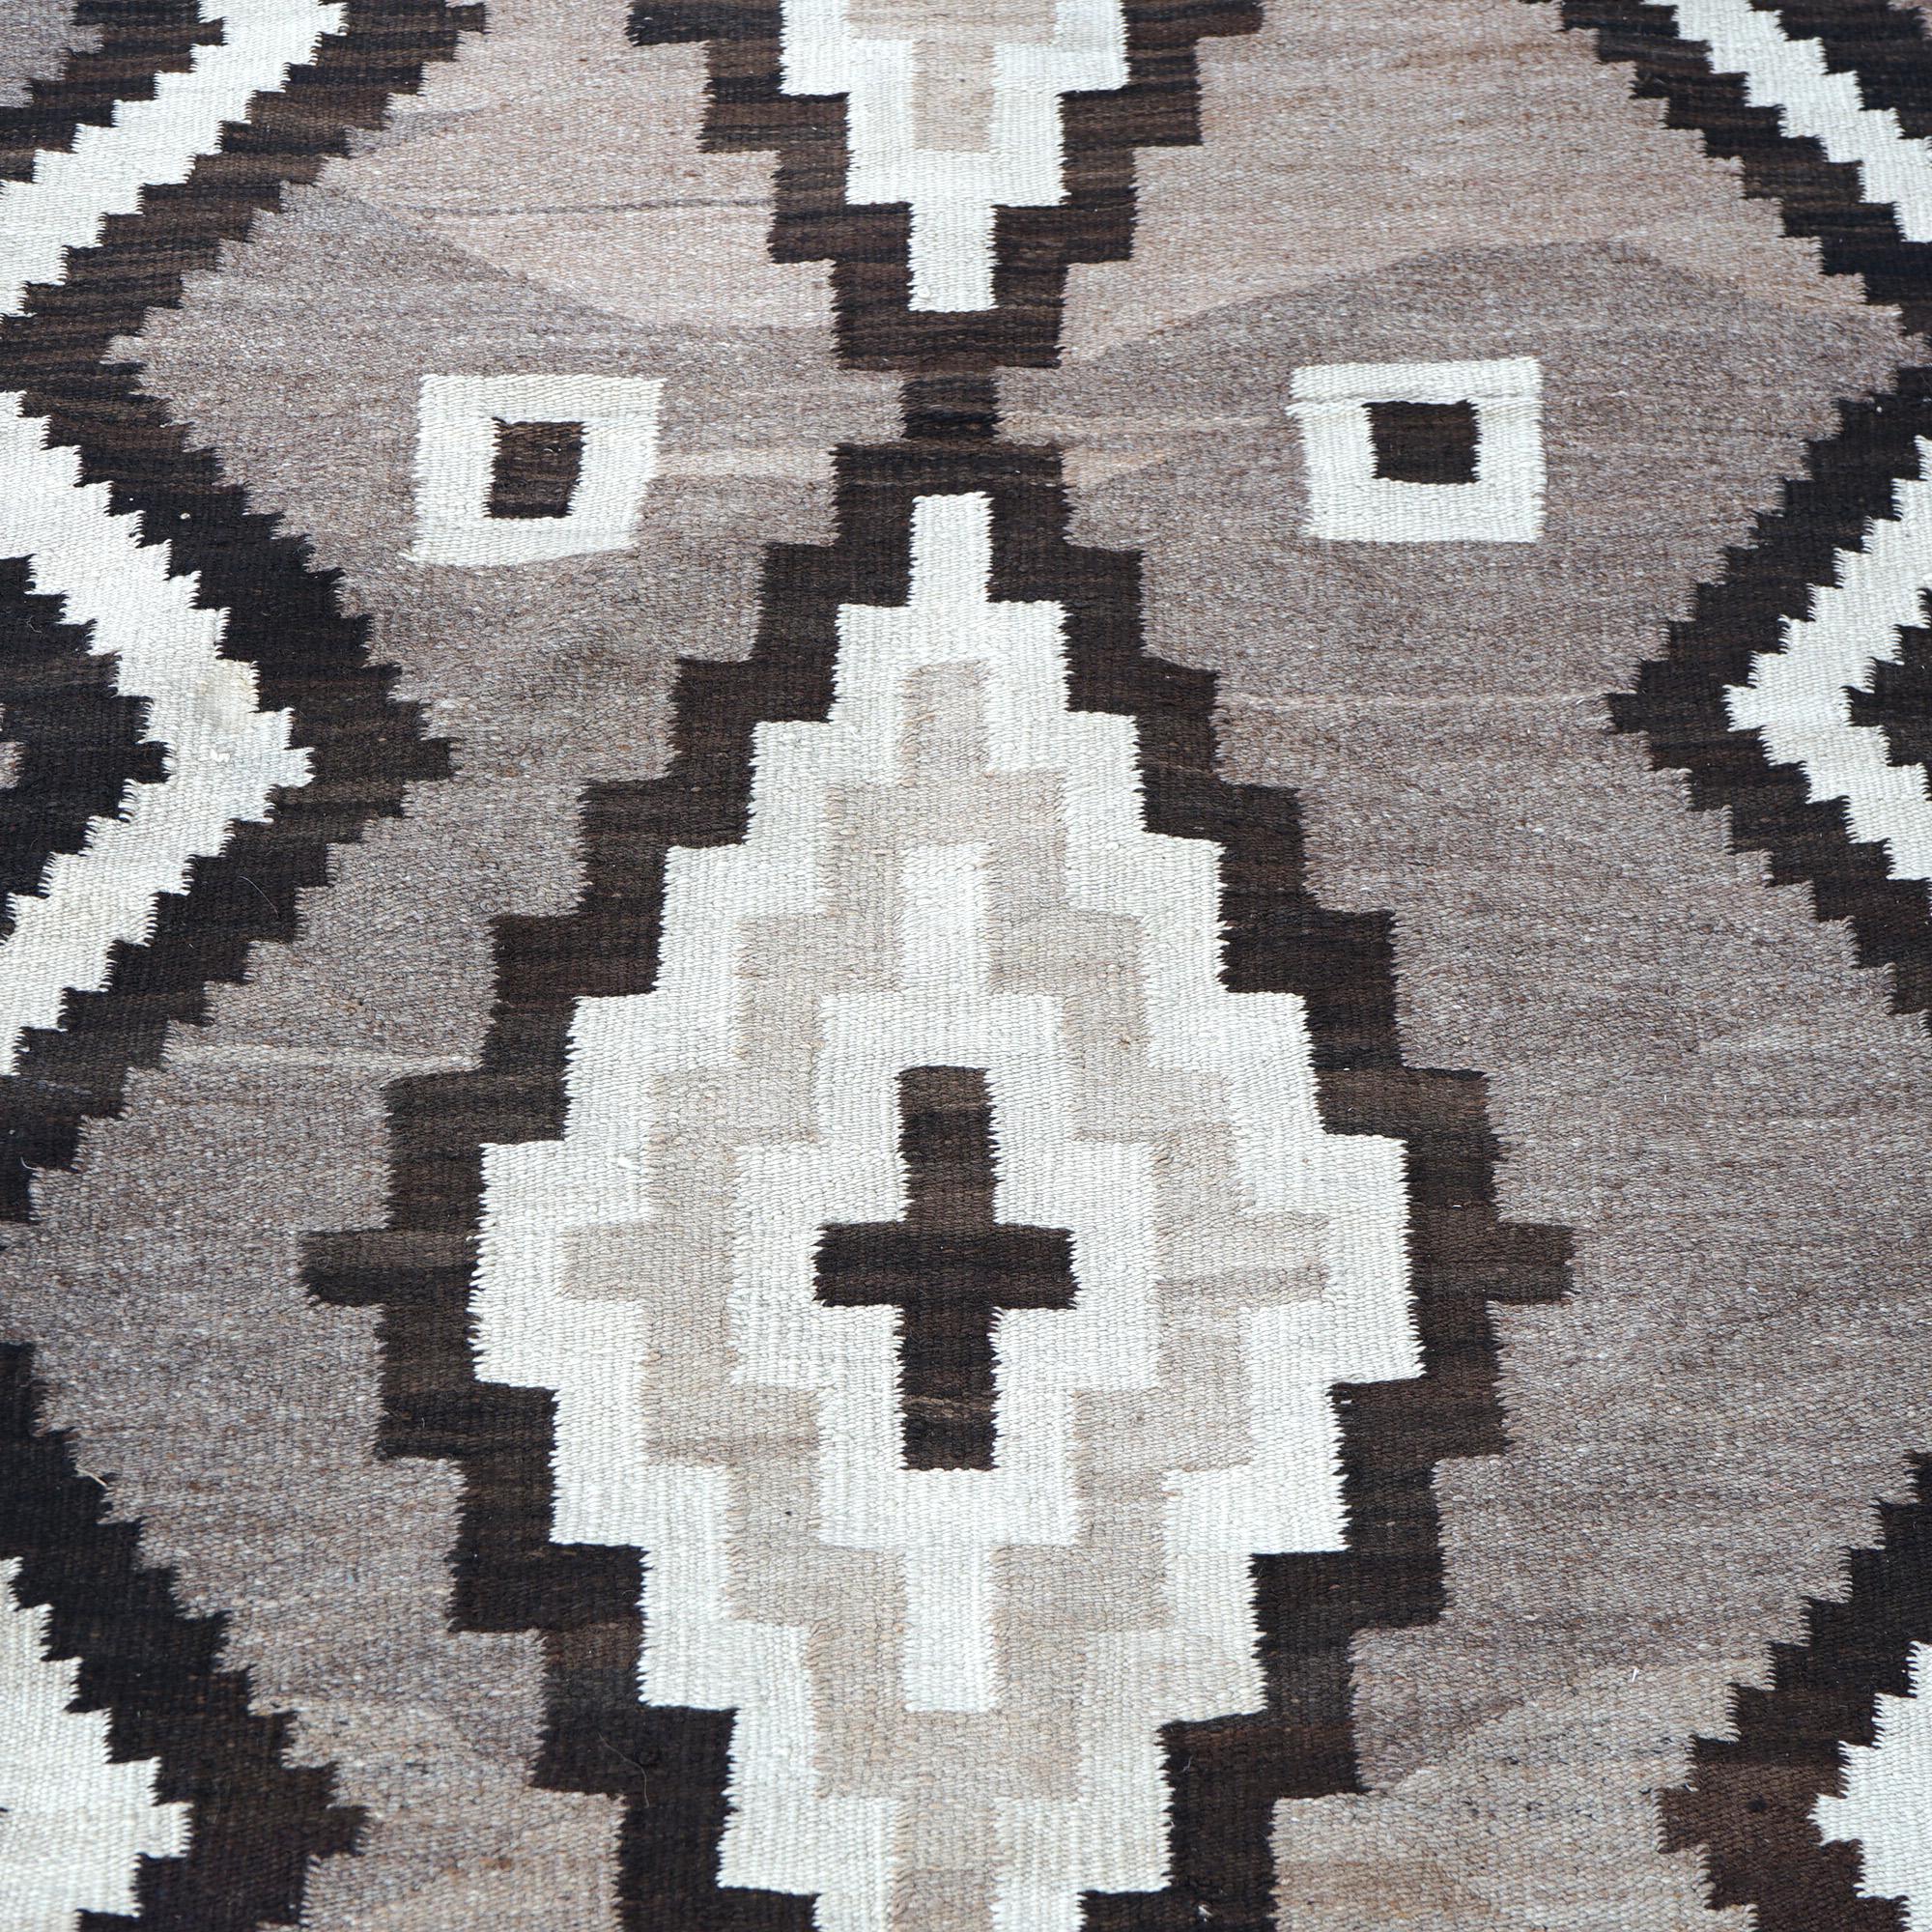 Antique Two Gray Hills Southwest American Indian Navajo Wool Rug Circa 1920 For Sale 7